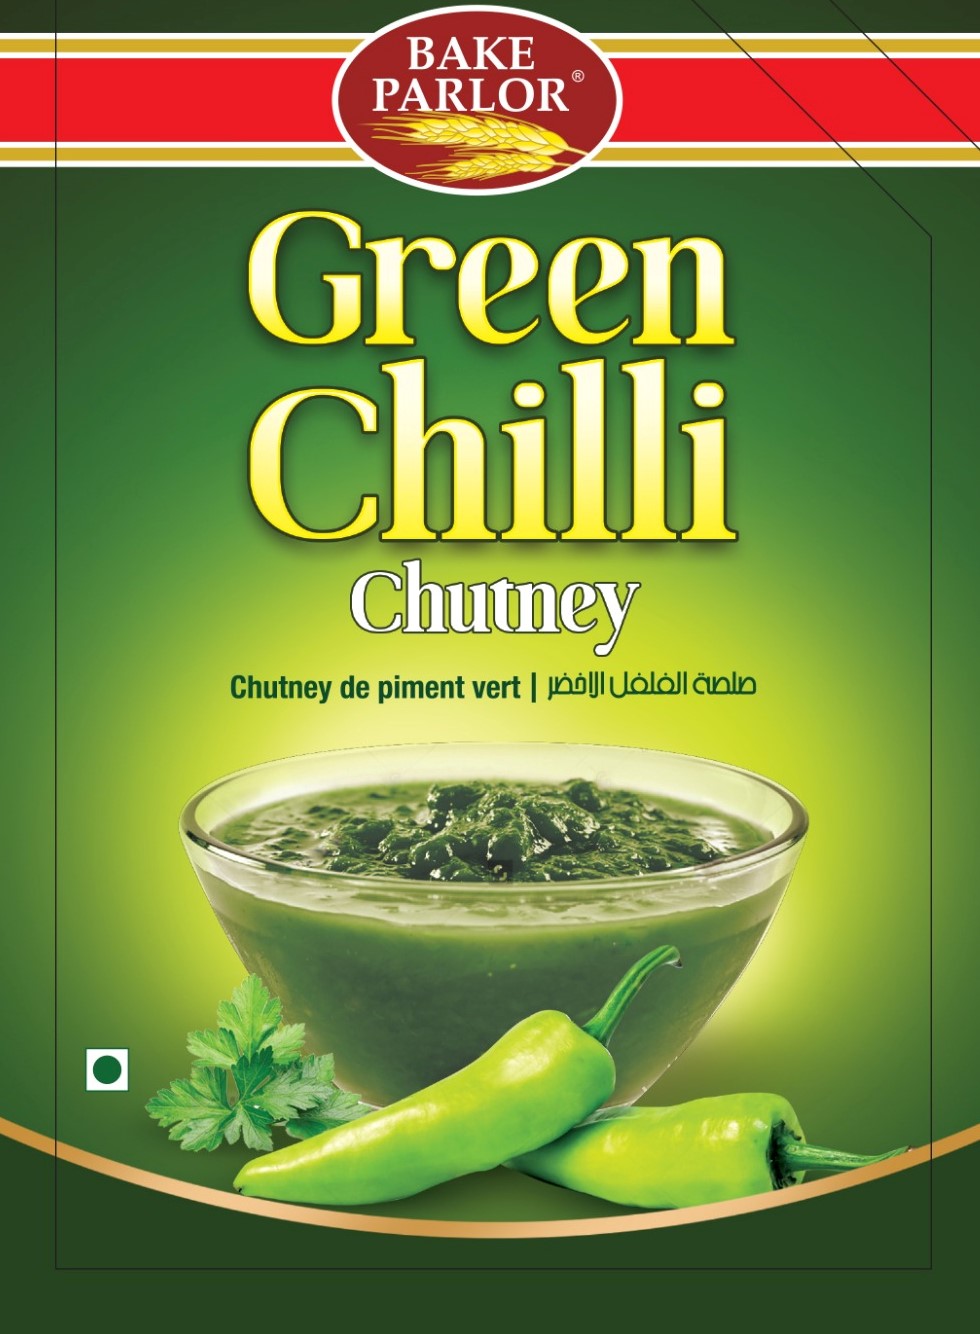 Bake Parlor Green Chilli Chutney Pouch - 400gm